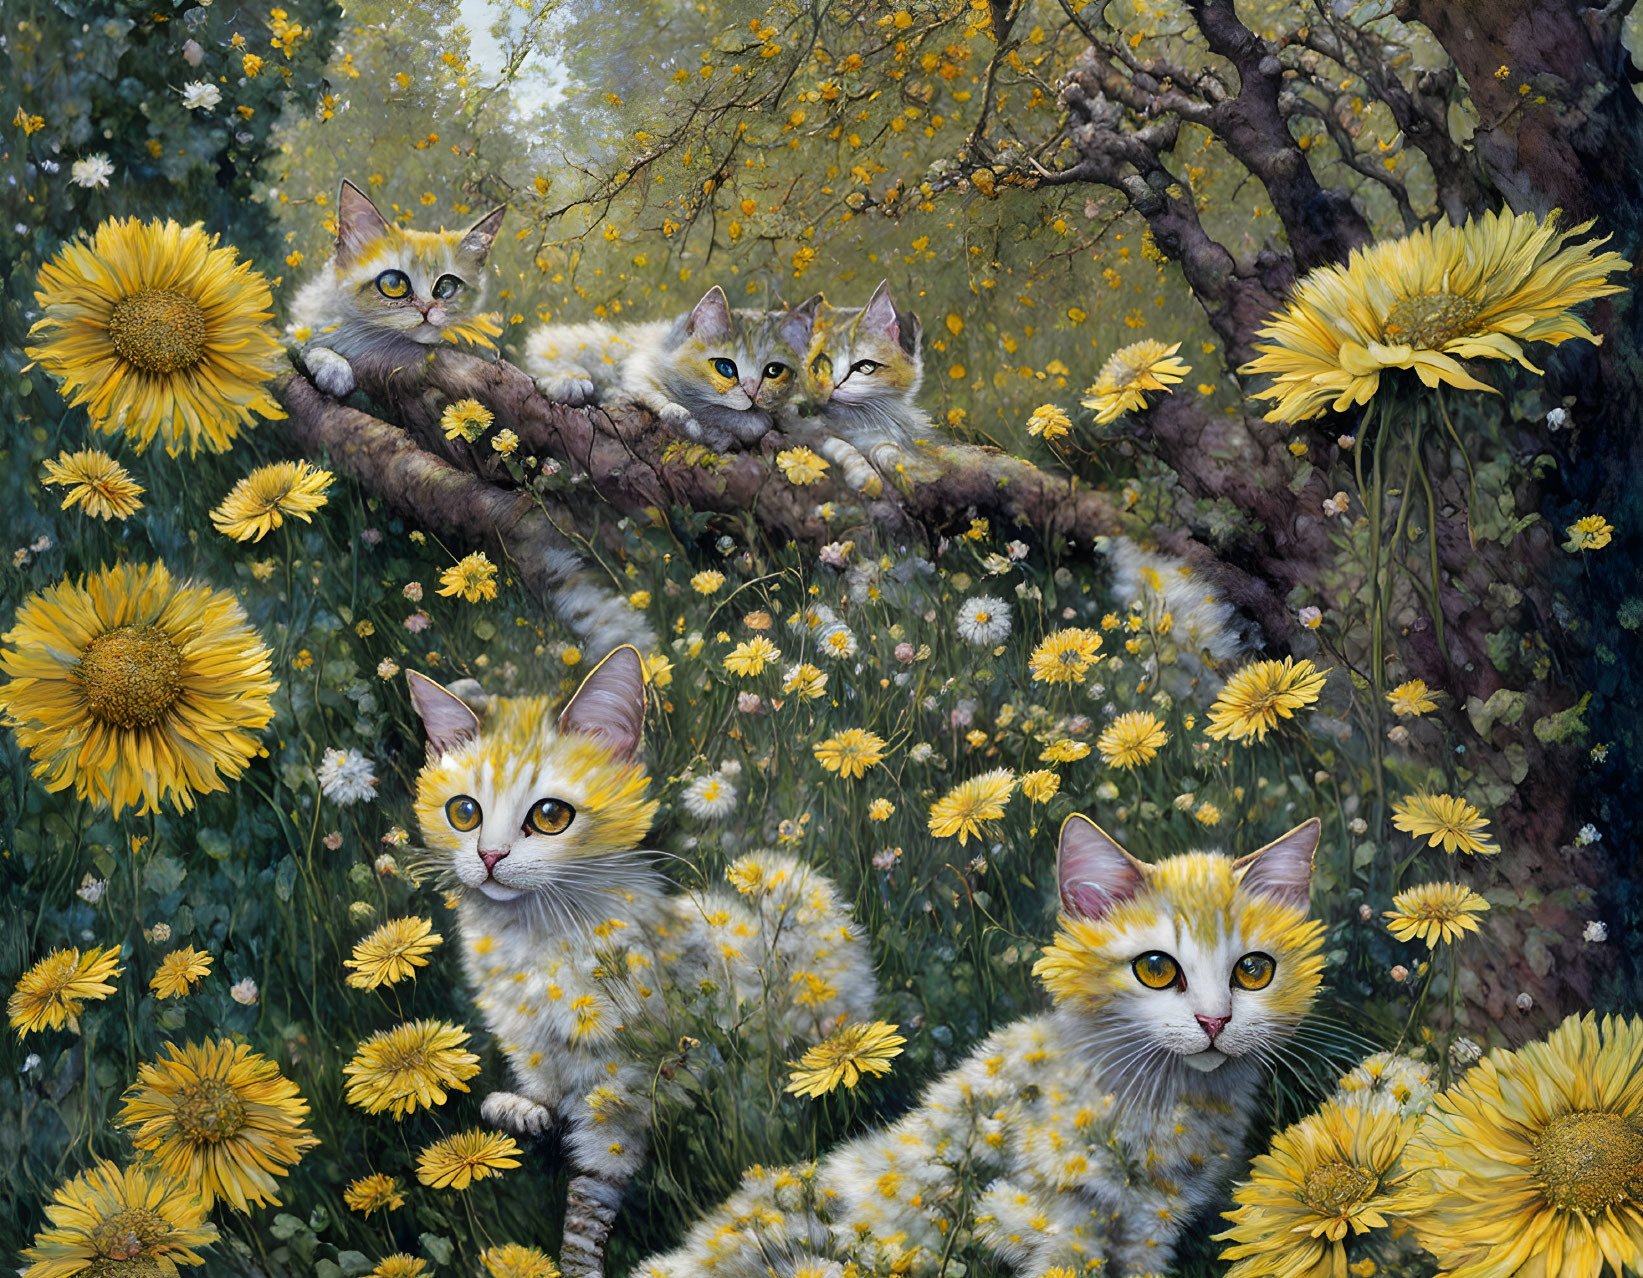 Four kittens blend in with yellow daisies and tree in painting